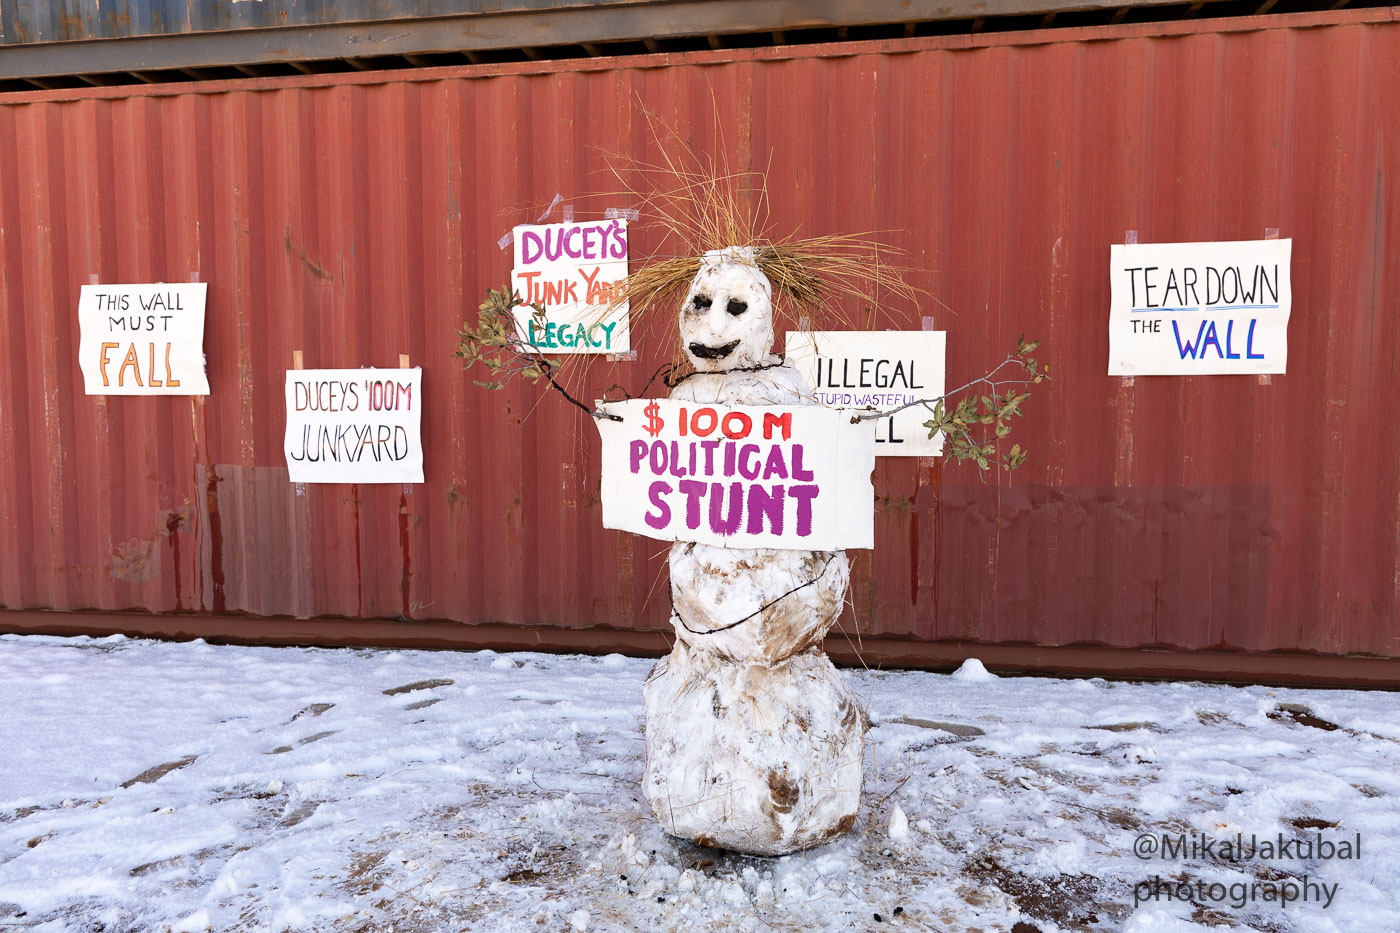 A dirty snowman made from found large snowballs and branches for arms holds a protest sign that reads "$100 million political stunt". Behind it is a shipping container with additional signs saying "Tear down the wall," "this wall must fall," " Ducey's junk yard legacy."